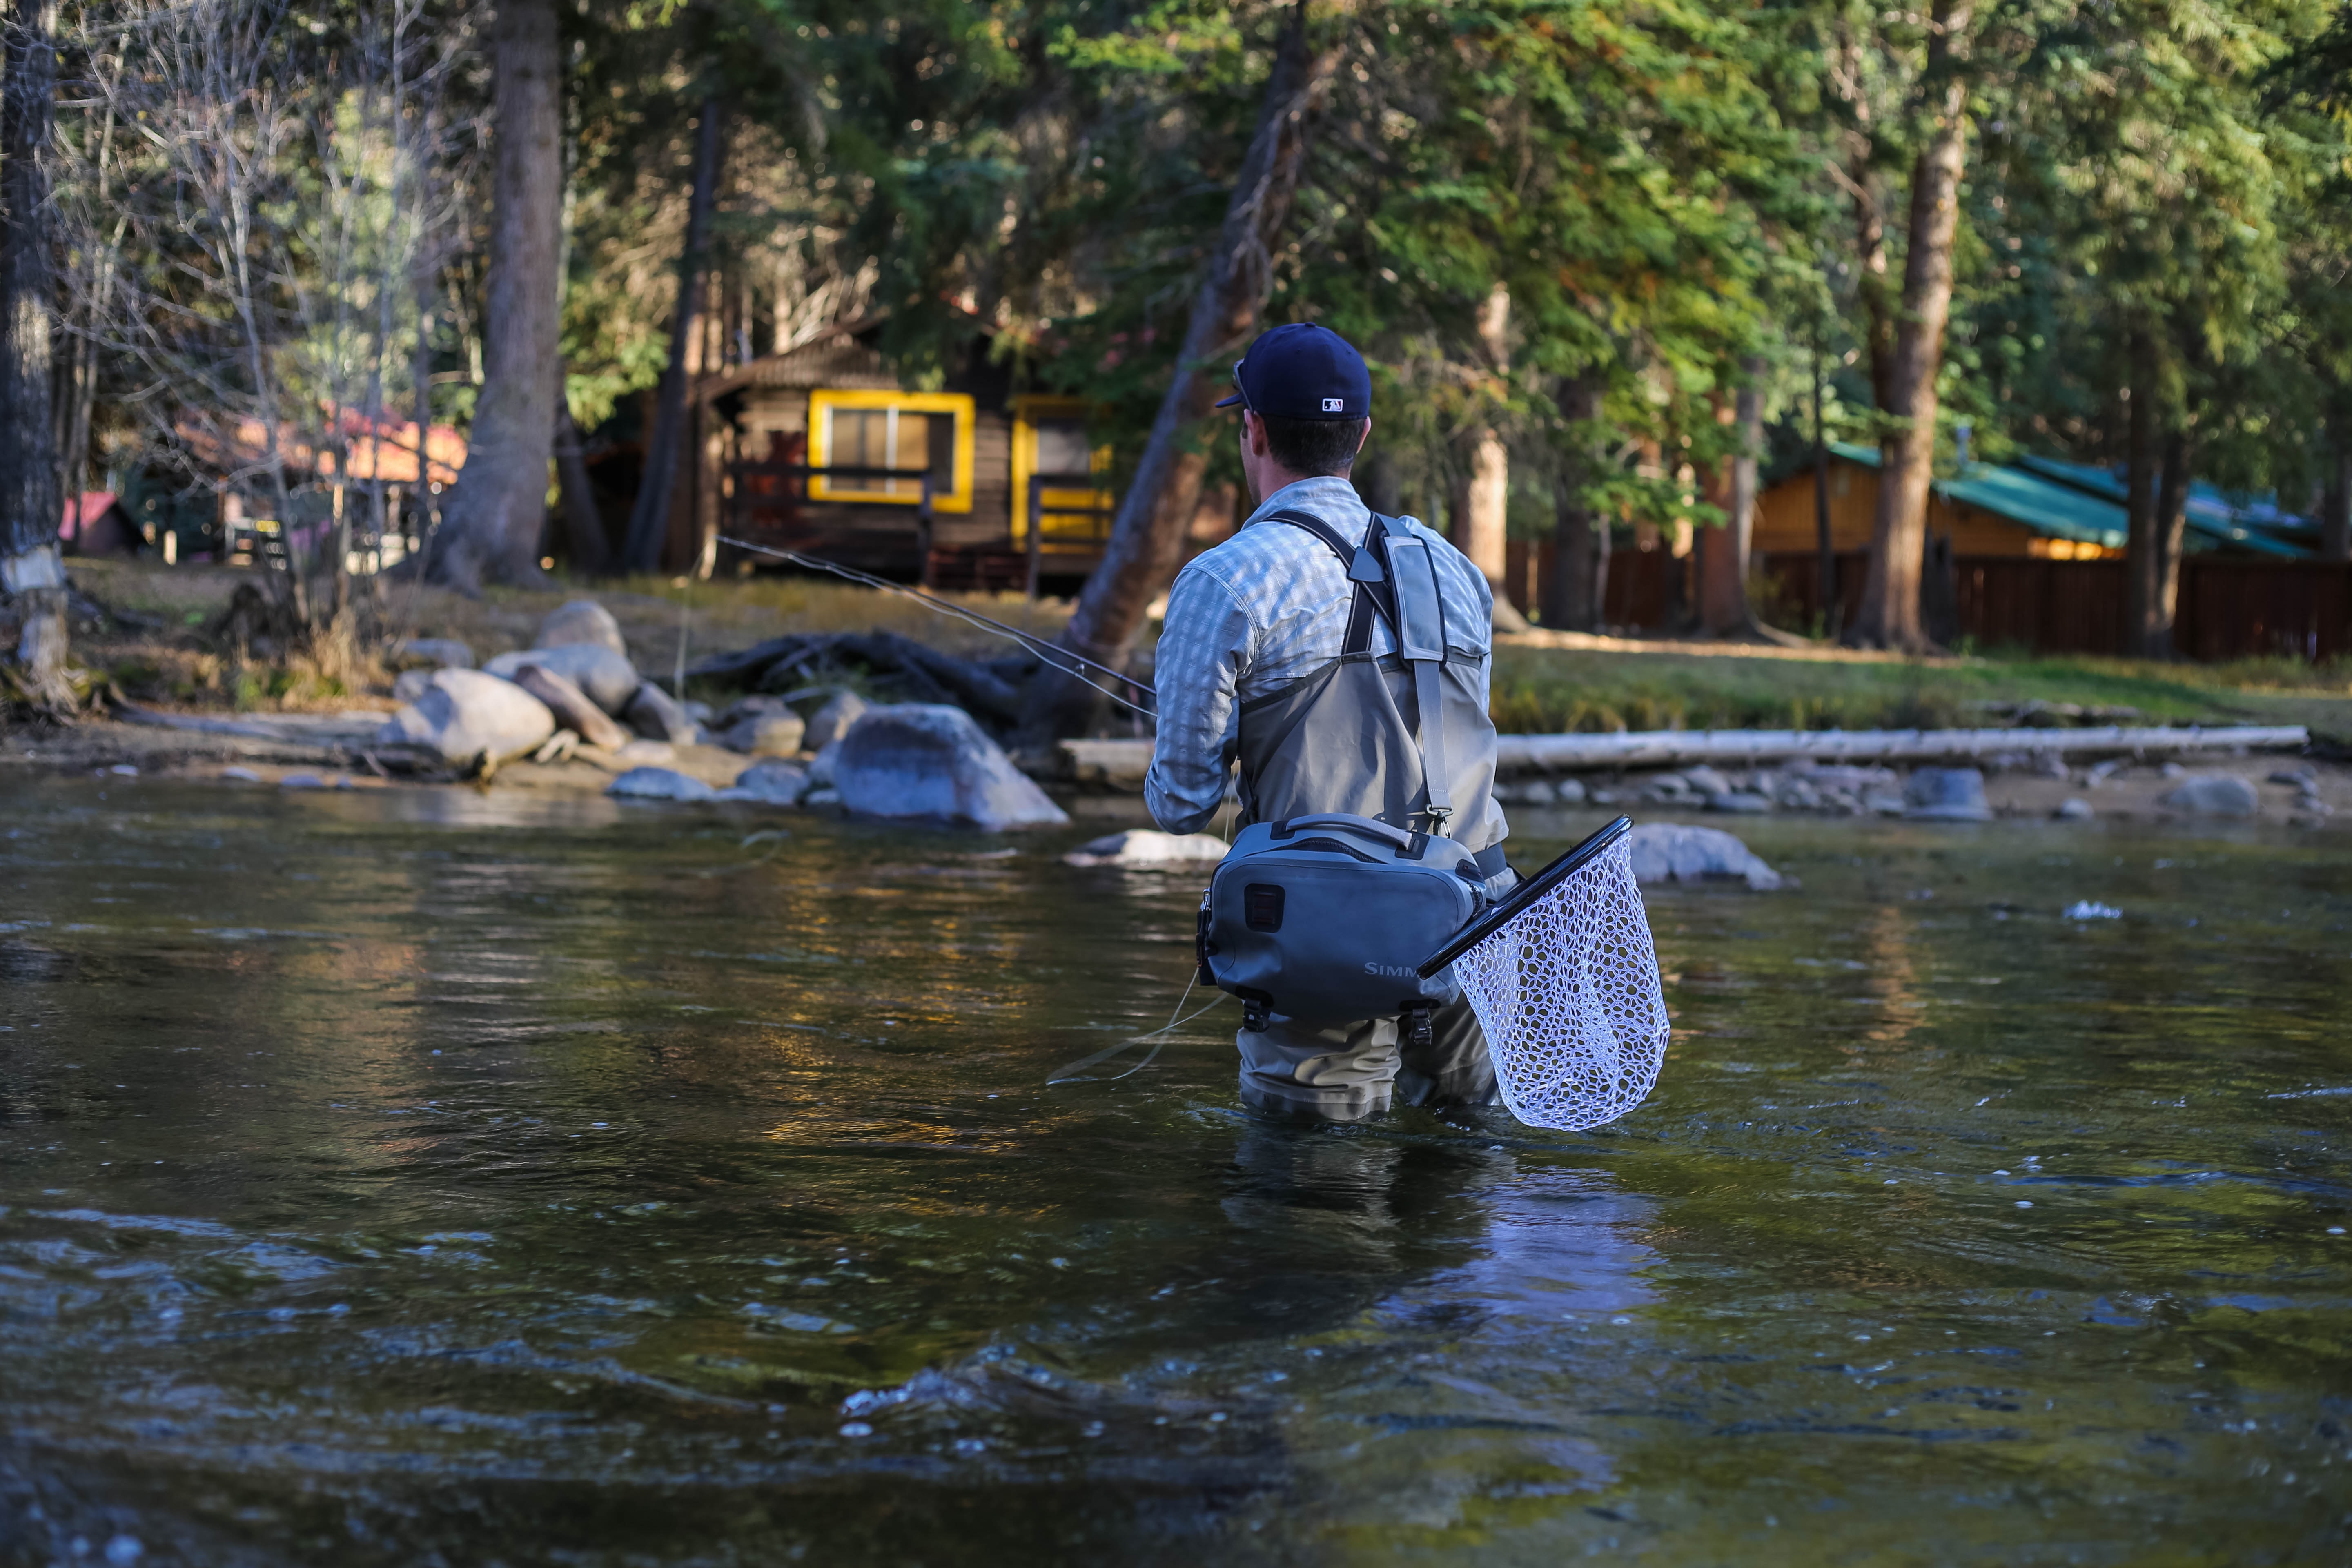 A fly fishing enthusiast wades into the Colorado Rier.